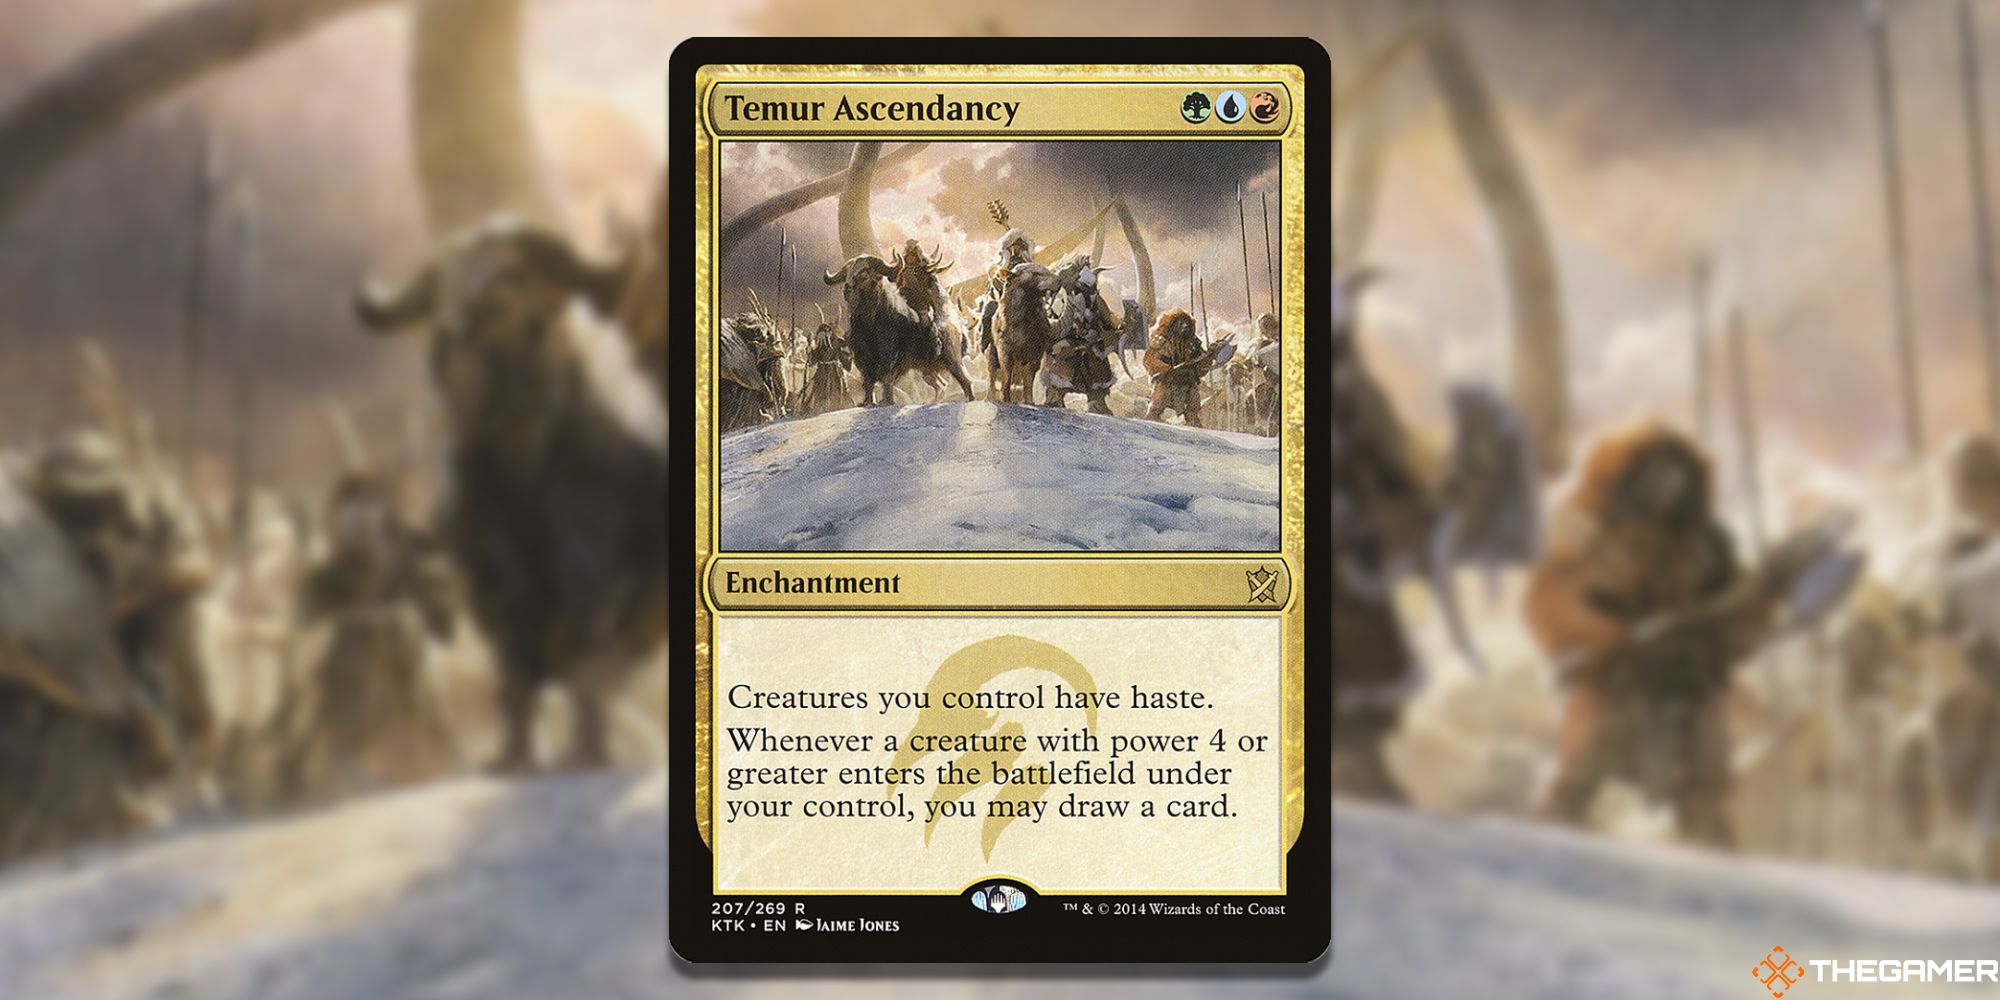 Image of the Temur Ascendancy card in Magic: The Gathering, with art by Jaime Jones